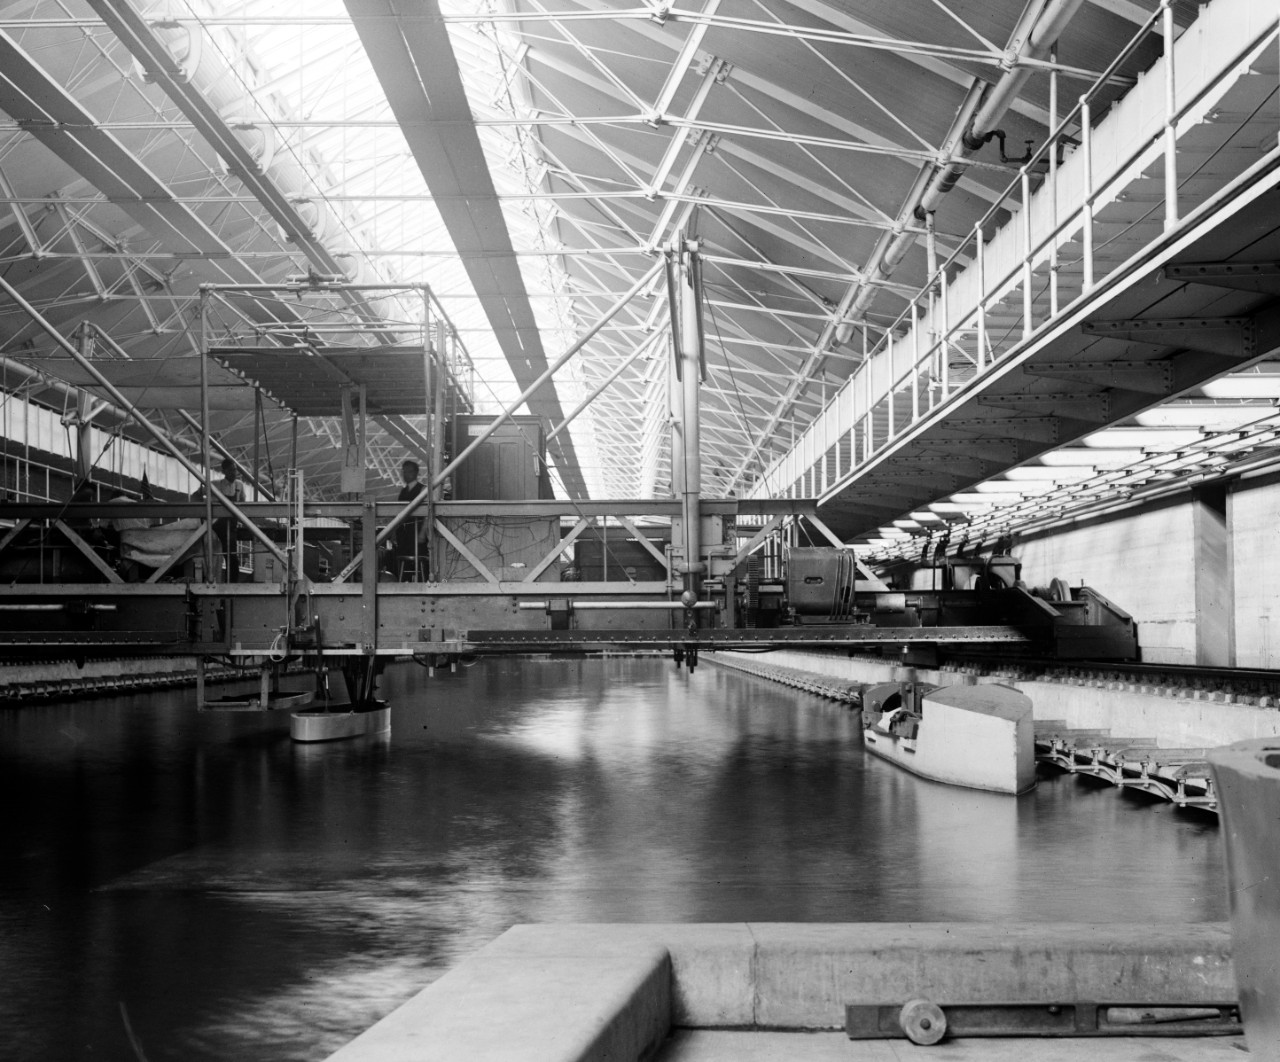 LC-DIG-NPCC-00824:  Experimental Model Basin, Washington Navy Yard, 1918.   Note man on platform.  The Model Basin is now the Cold War Gallery of the National Museum of the U.S. Navy.   Courtesy of the Library of Congress.  